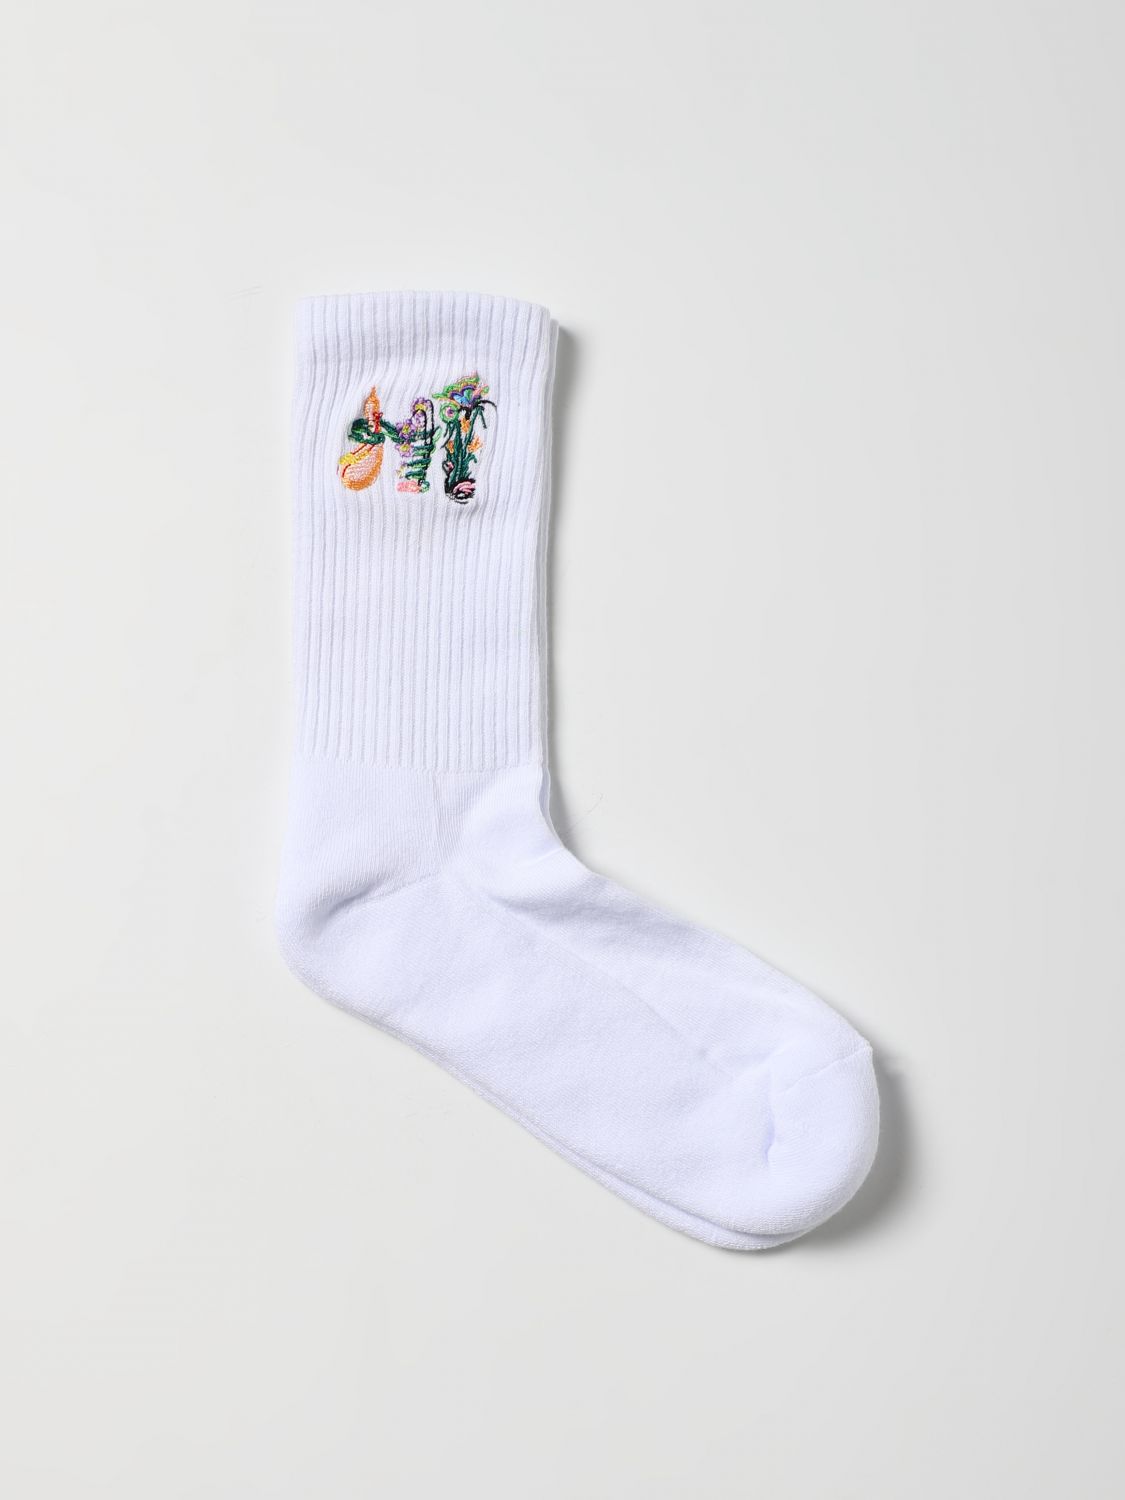 OPENING CEREMONY SOCKS OPENING CEREMONY WOMAN COLOR WHITE,363171001